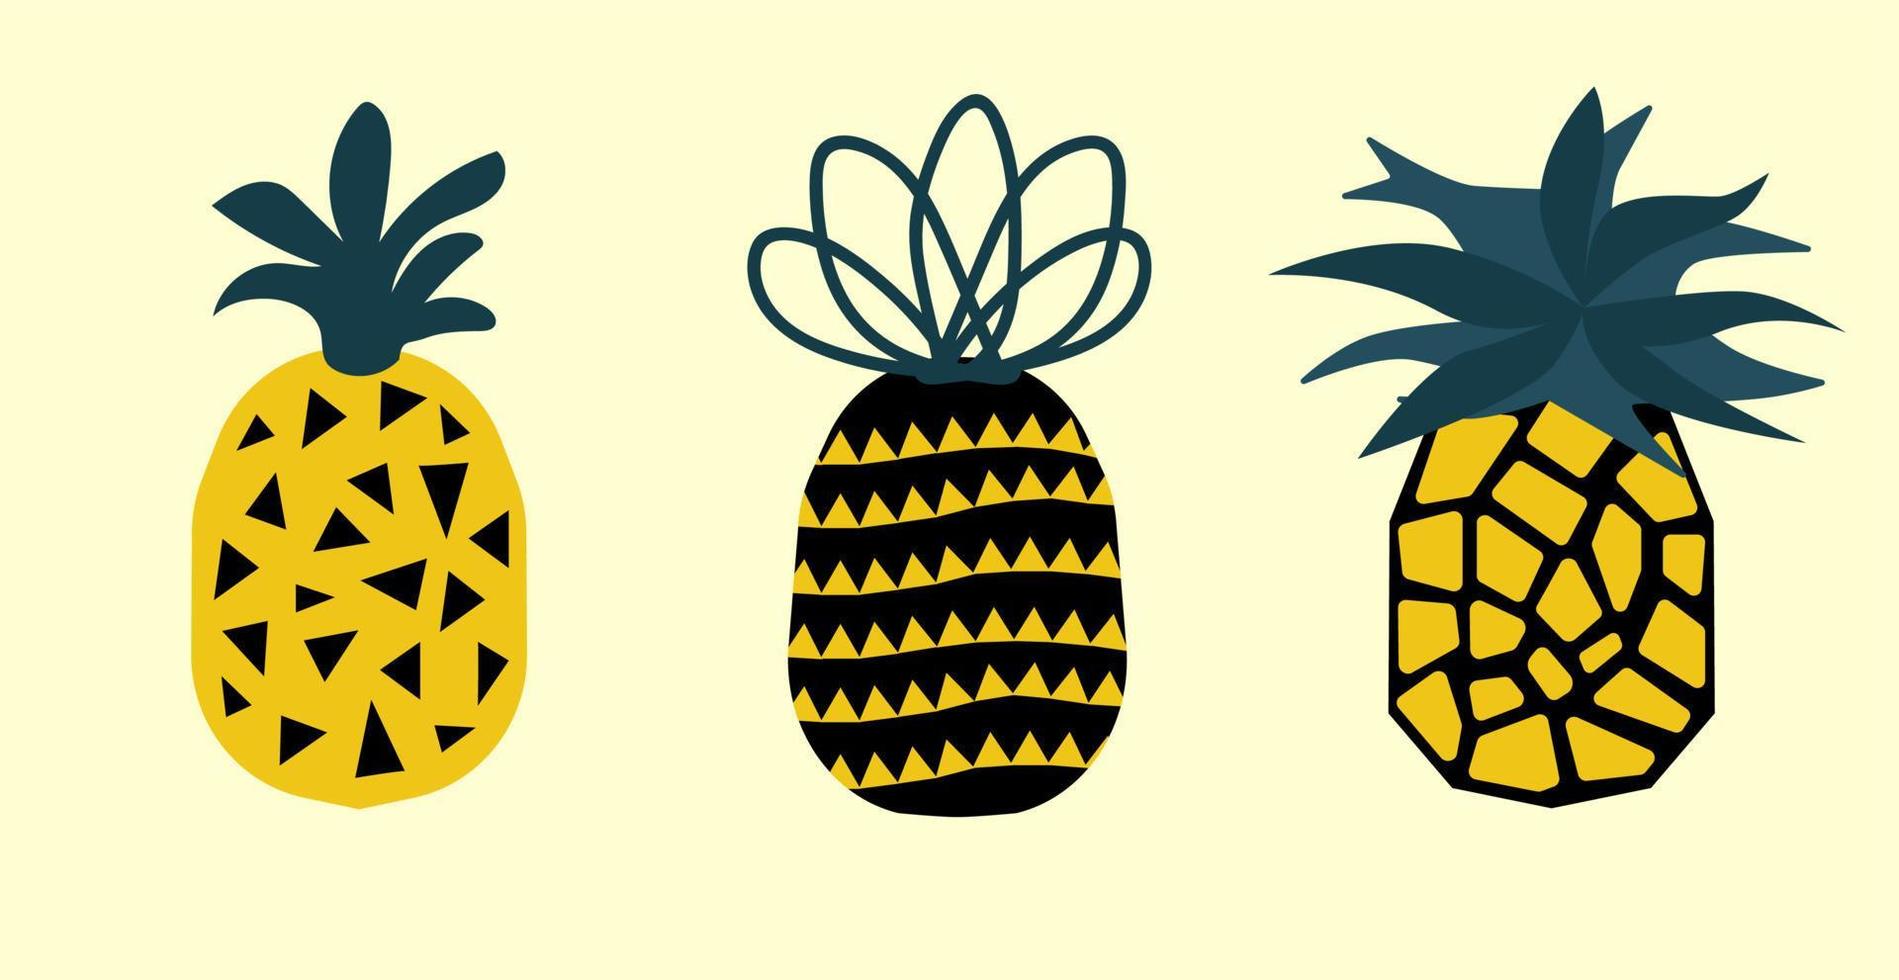 fresh pineapple illustration with various shapes and styles of abstract drawing vector